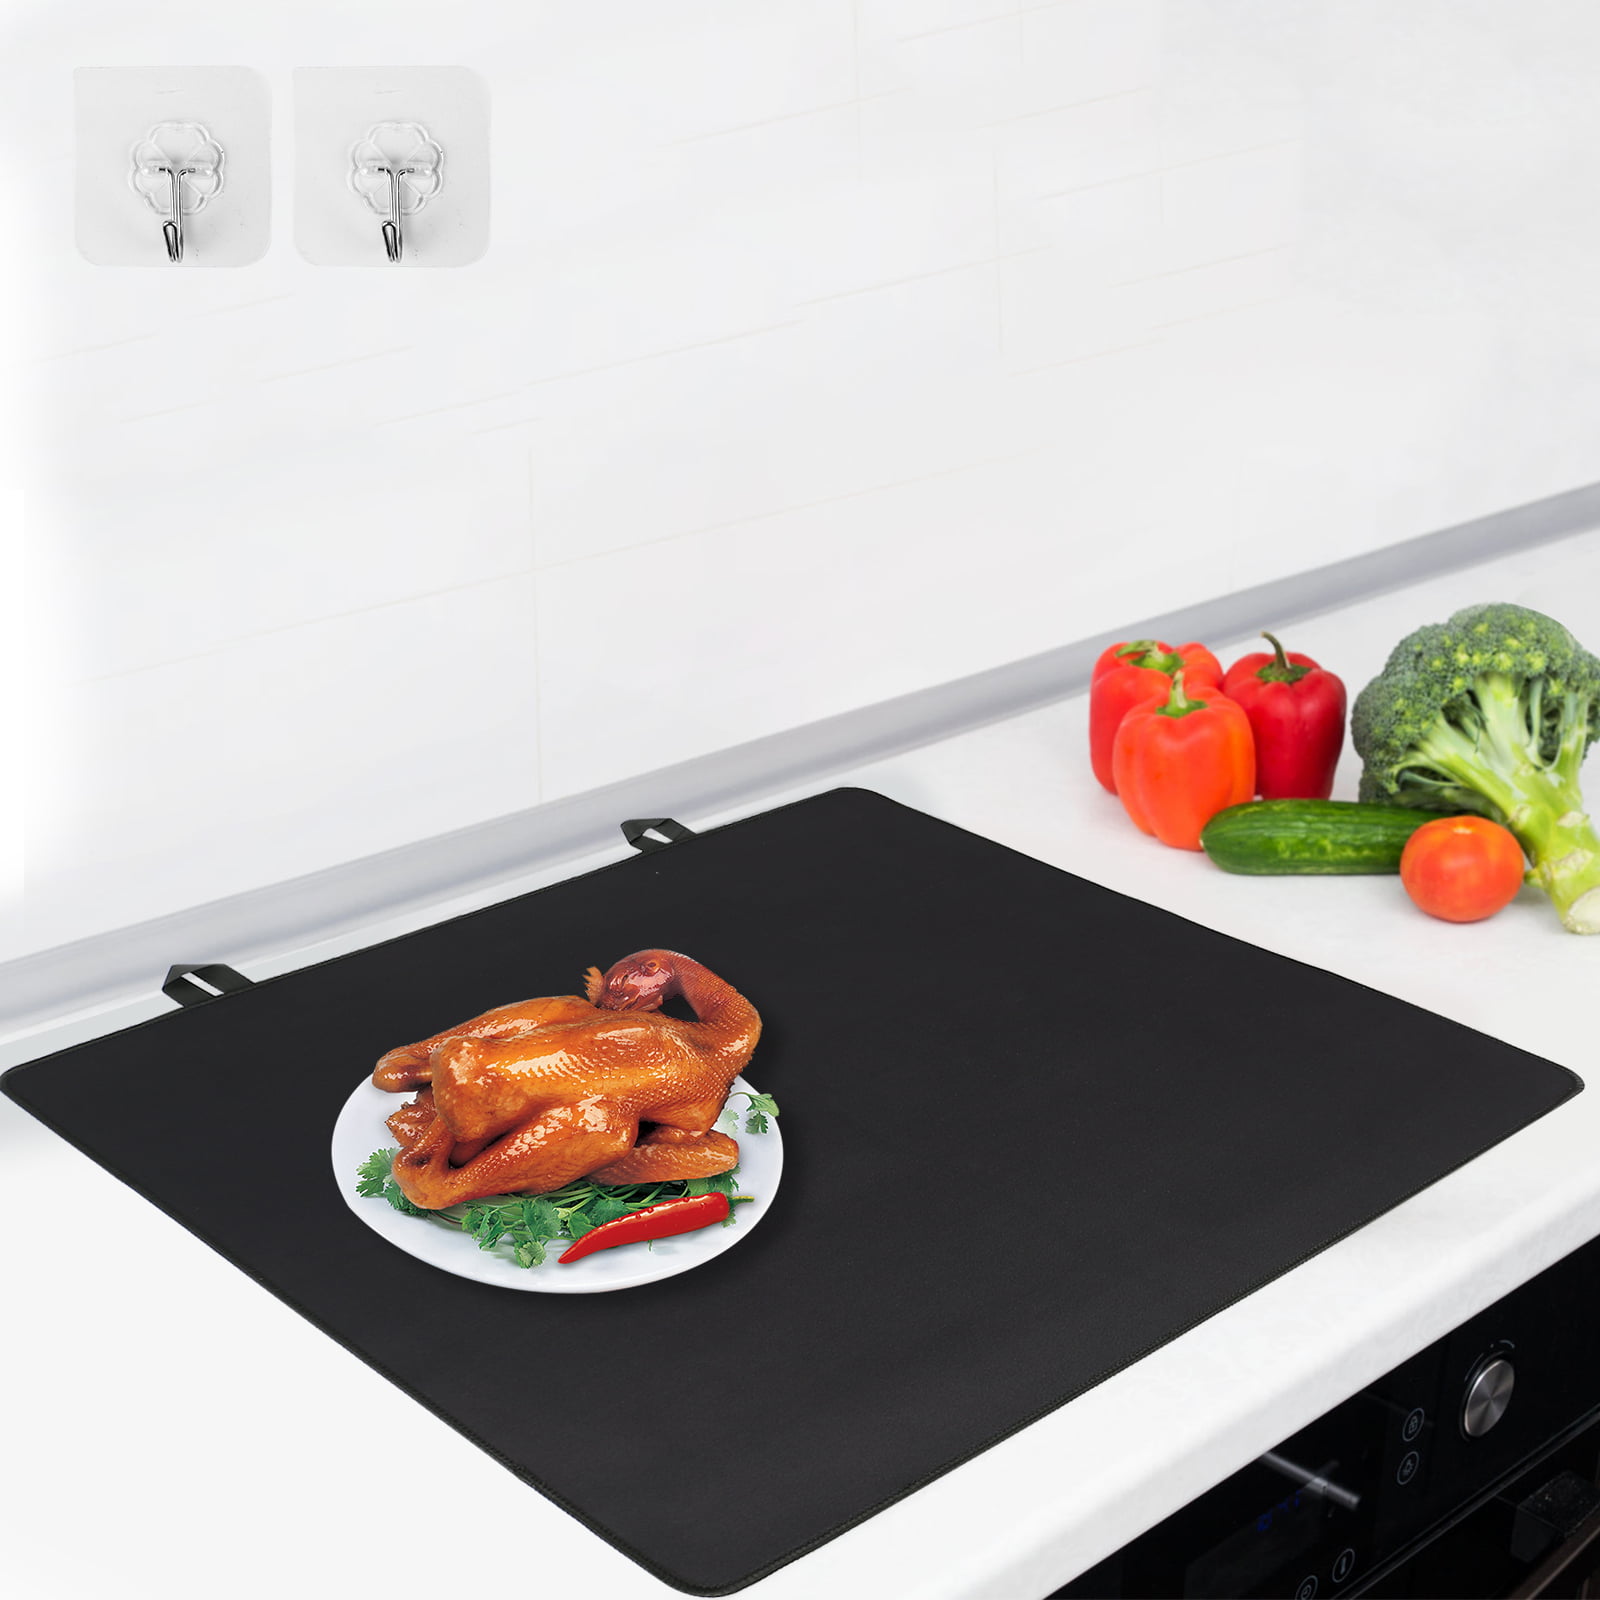 Stove Top Cover, 30.4 inch x 21.5 inch Electric Stove Cover Mat, Ceramic Glass Stove Protector, Washable Rubber Stove Protector Keep Stove Clean